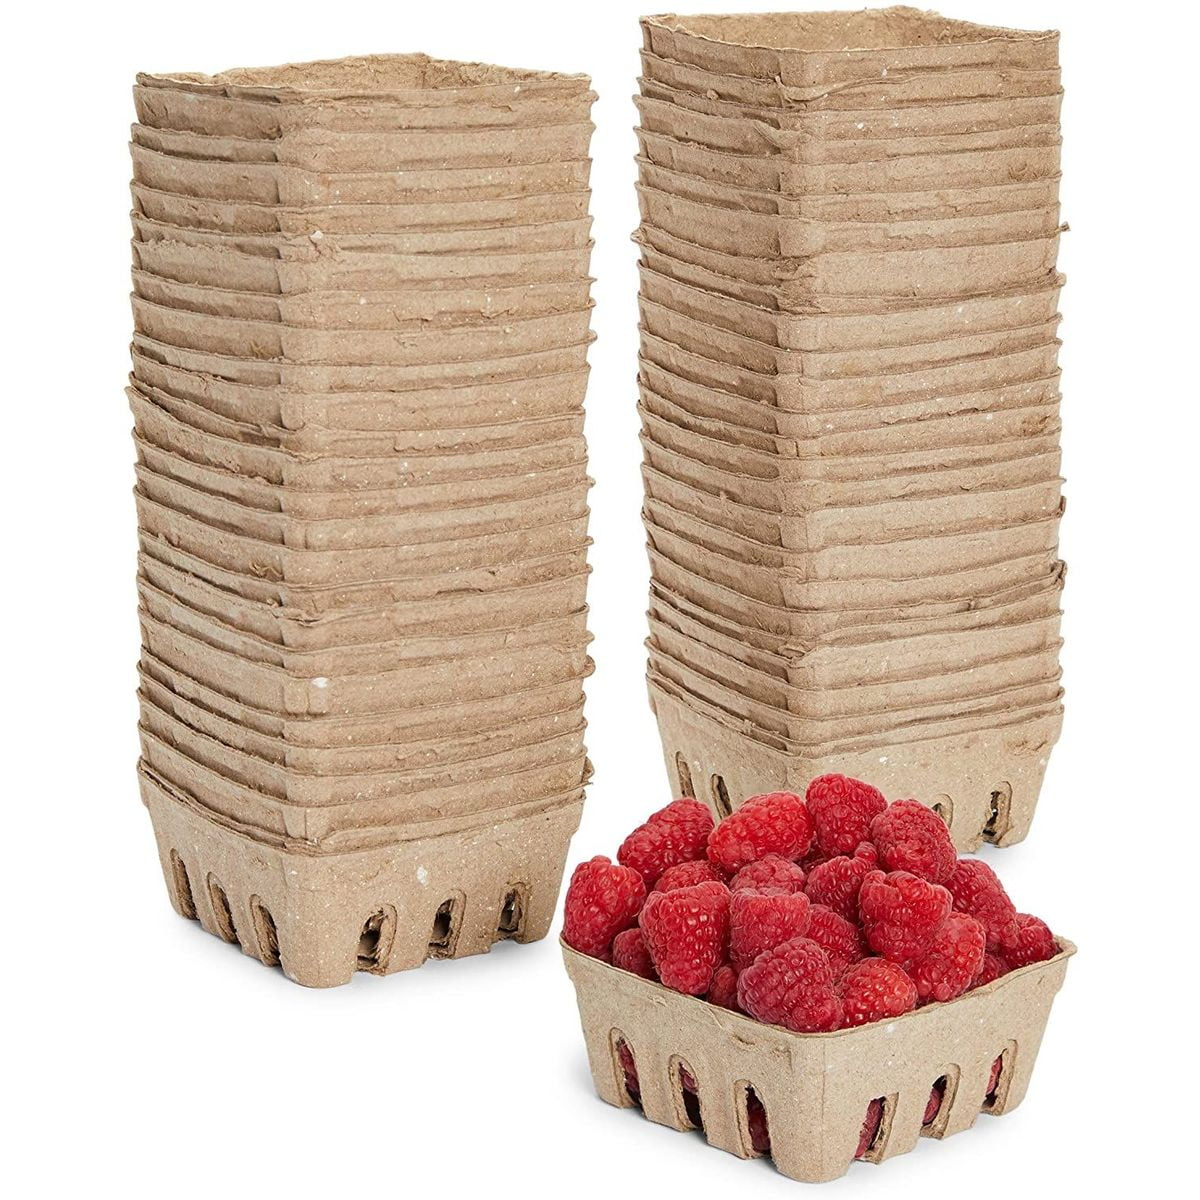 Pint Size for Blueberries Plastic Berry Basket/Produce Containers Strawberries Raspberries 35 PACK 